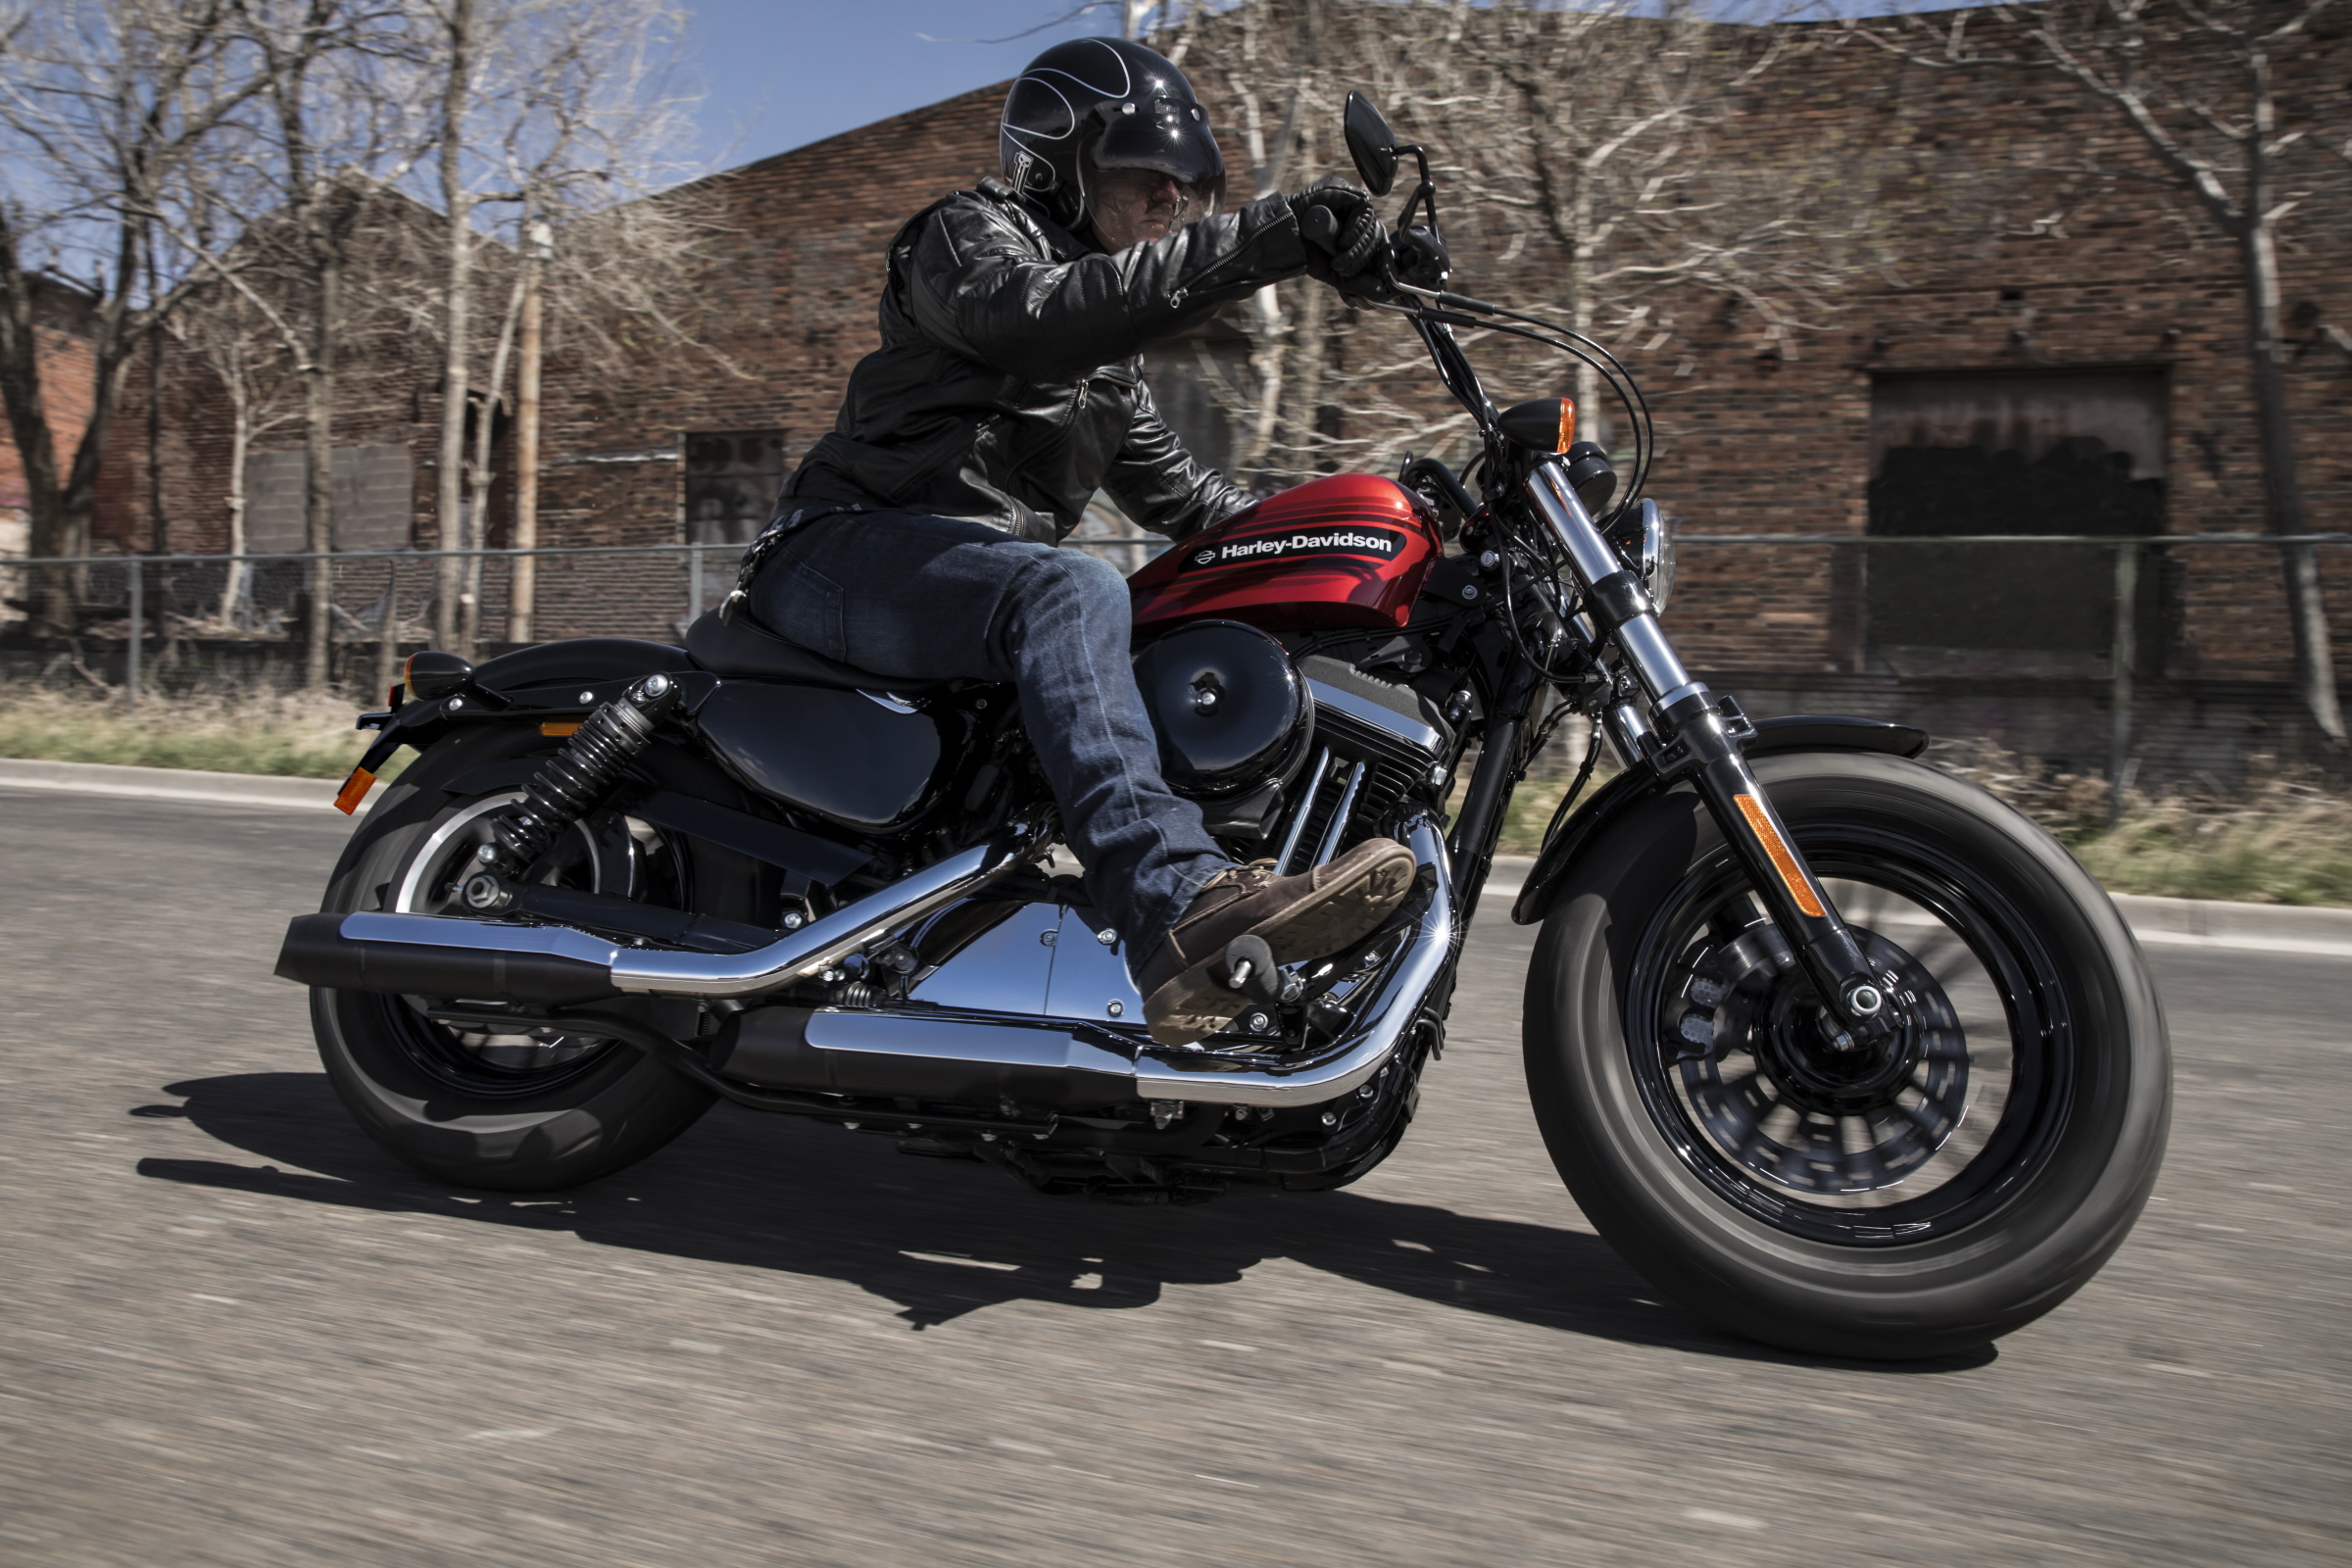 Harley Davidson Sportster Line Up Set To Be Axed From E Visordown